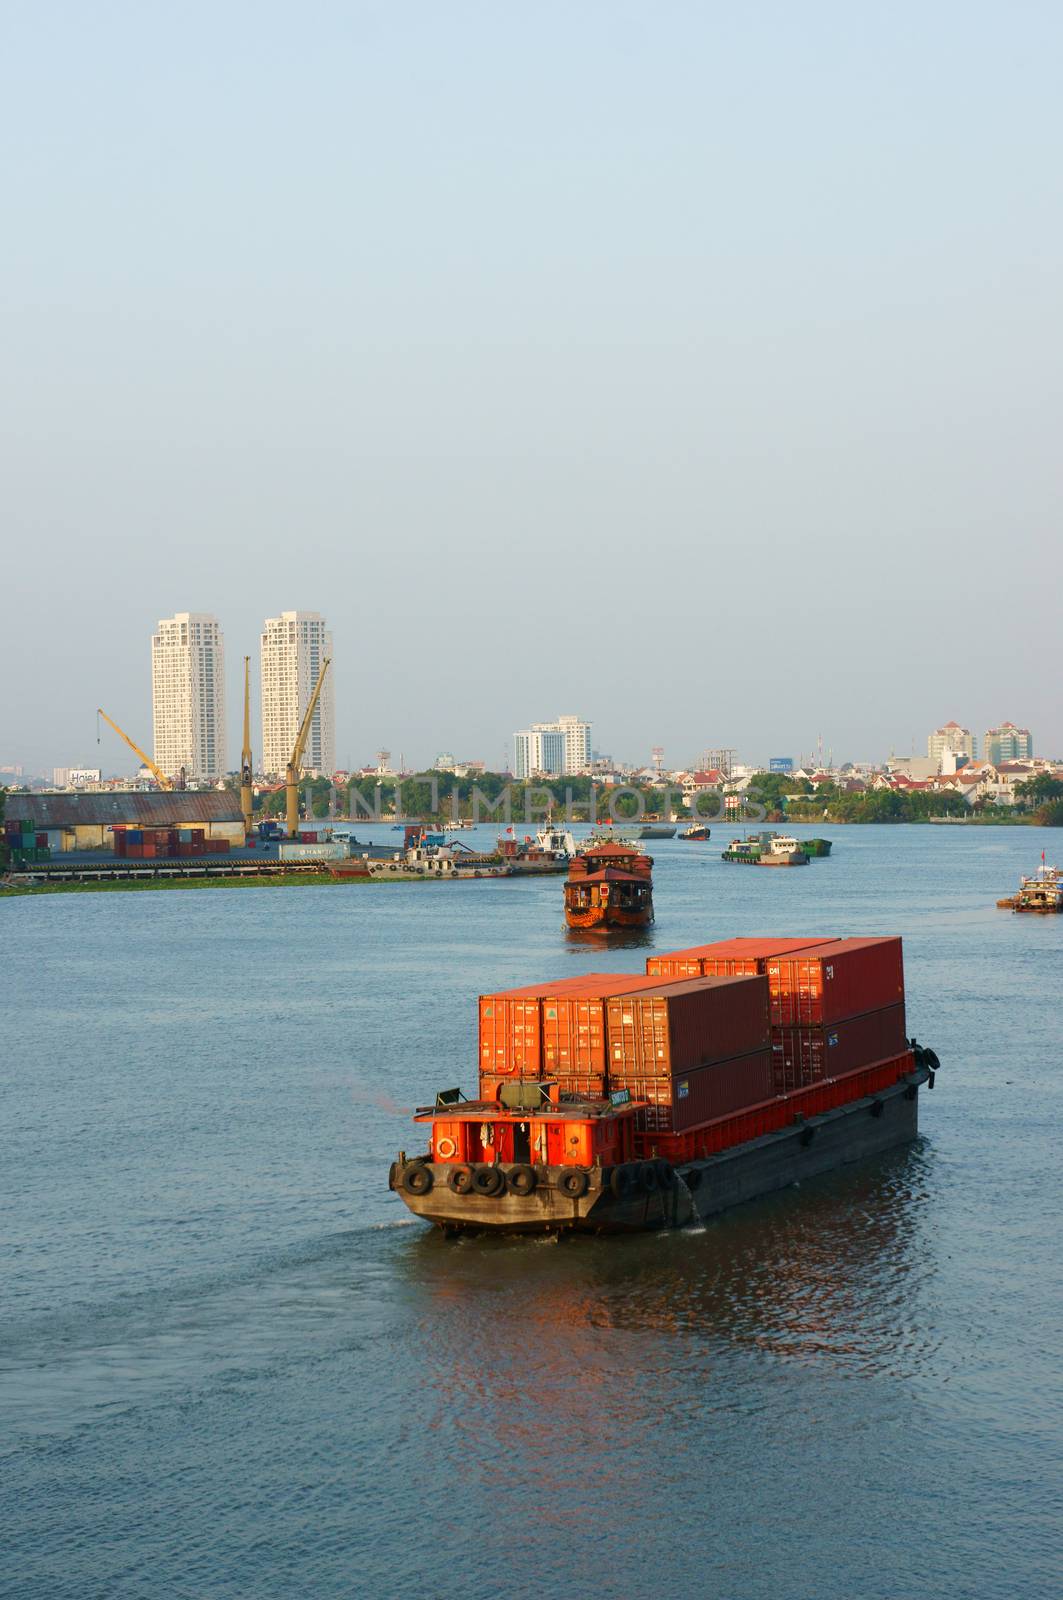 HO CHI MINH CITY, VIET NAM- MARCH 12: Maritime transport on river, vessel loading container on water, residential and apartment at riverside, scene of industrial city, Vietnam, March 12, 2014